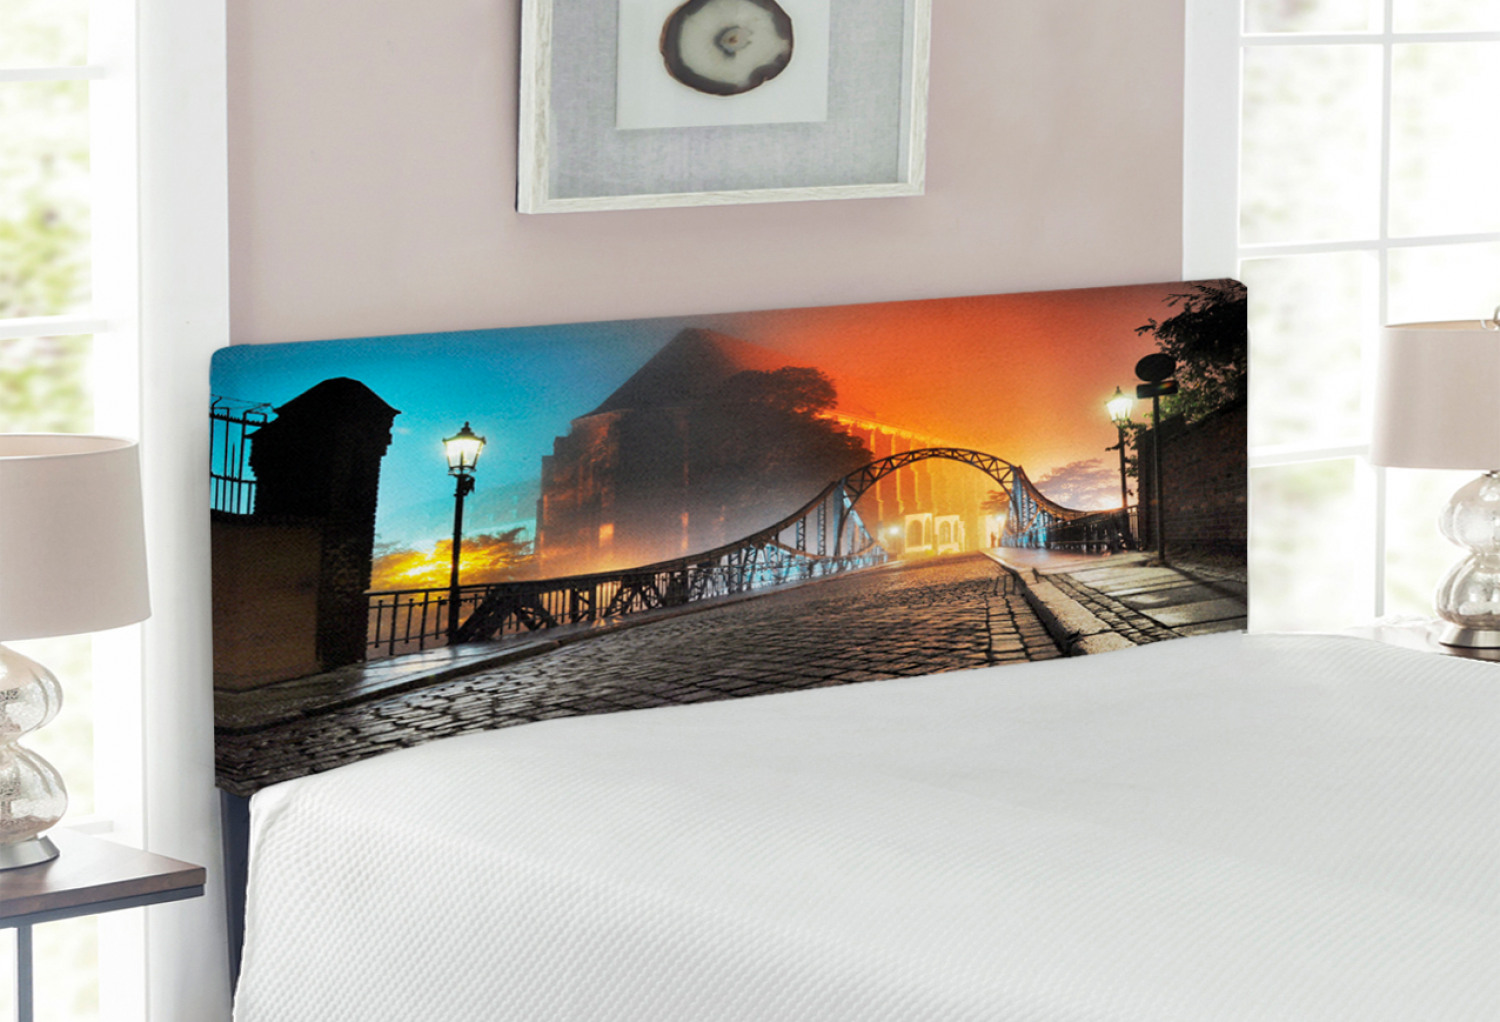 Landscape Headboard, Modern City Bridge at Night with Sightseeing Urban Theme Landscape, Upholstered Decorative Metal Bed Headboard with Memory Foam, Full Size, Grey Orange, by Ambesonne - image 2 of 4